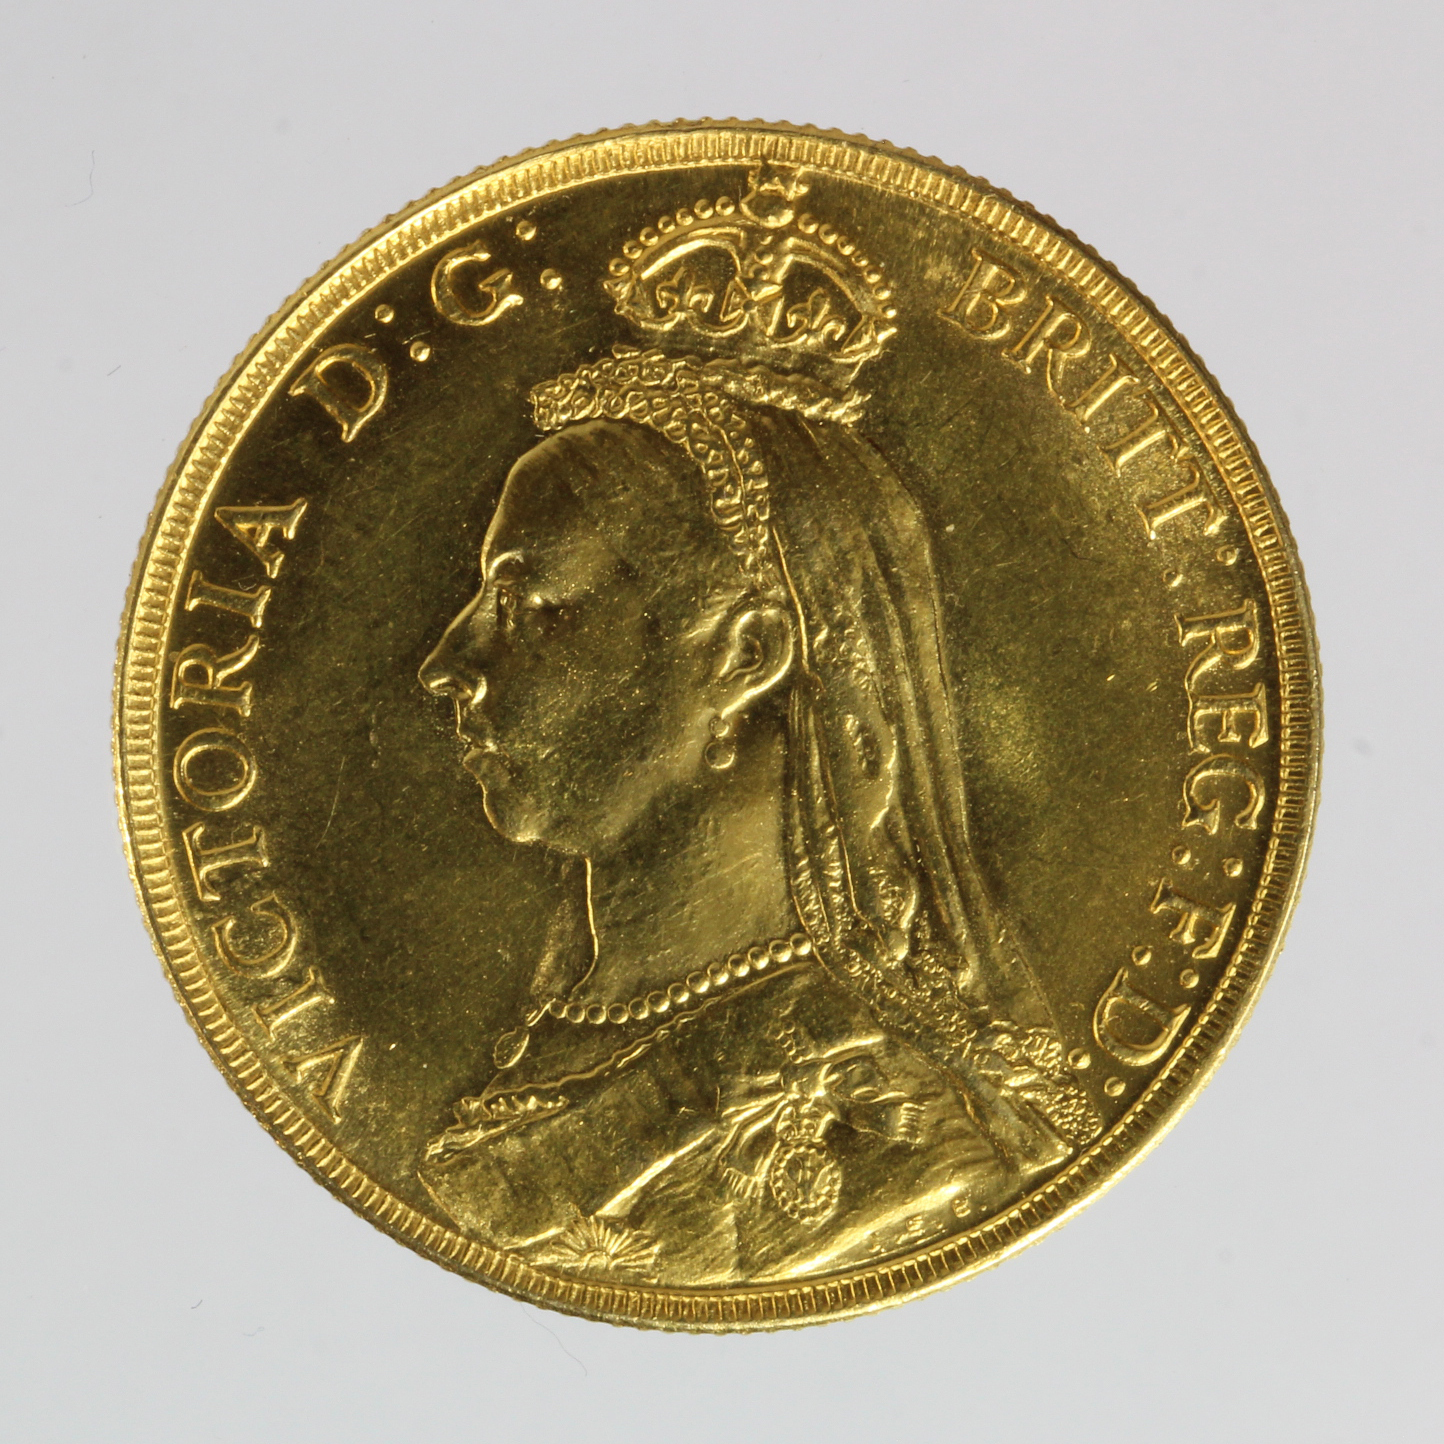 Two Pounds 1887 "jewellers copy" in 18ct gold, EF - Image 2 of 2